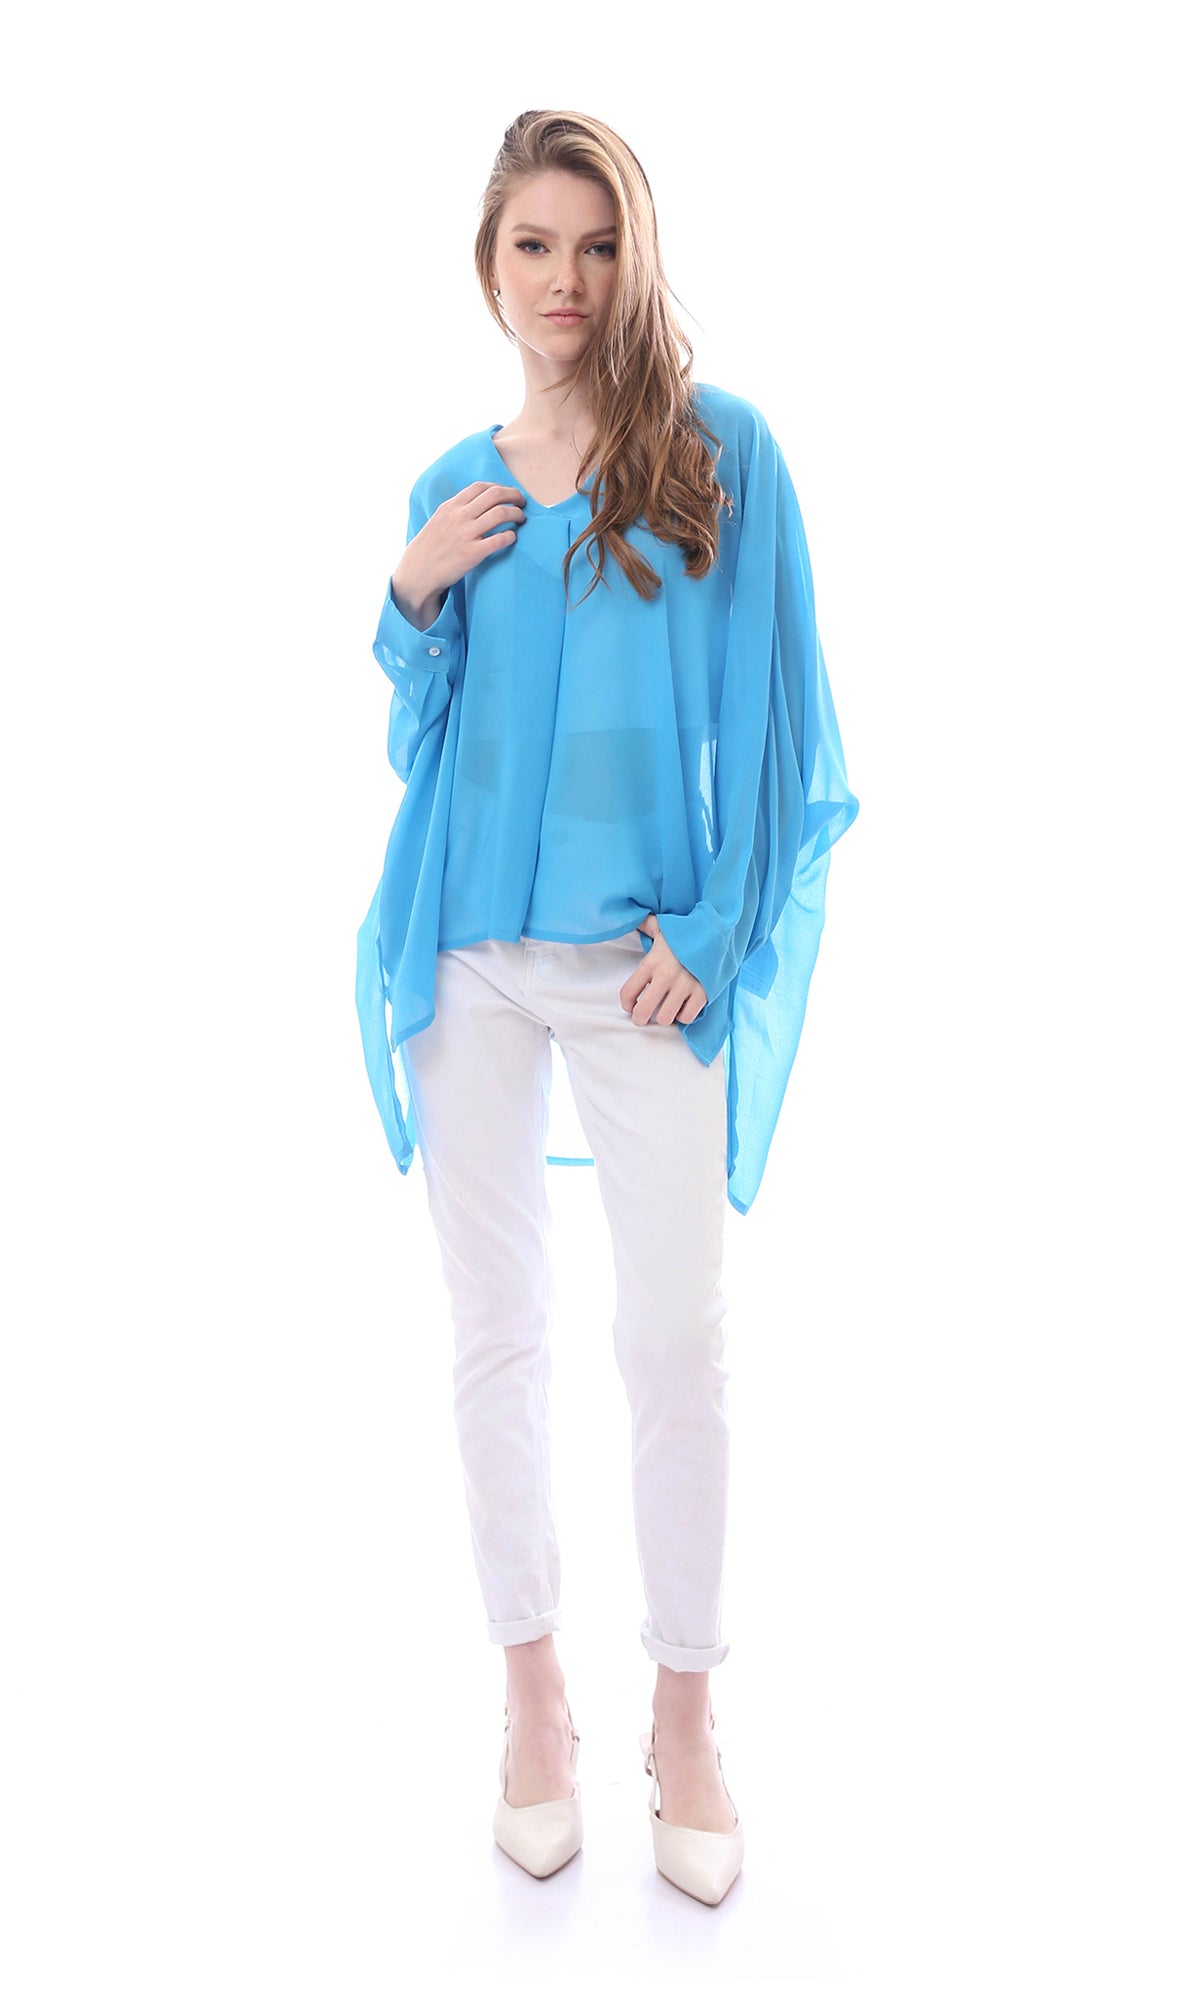 O165919 Wide V-Neck Solid Chiffon Turquoise Blouse